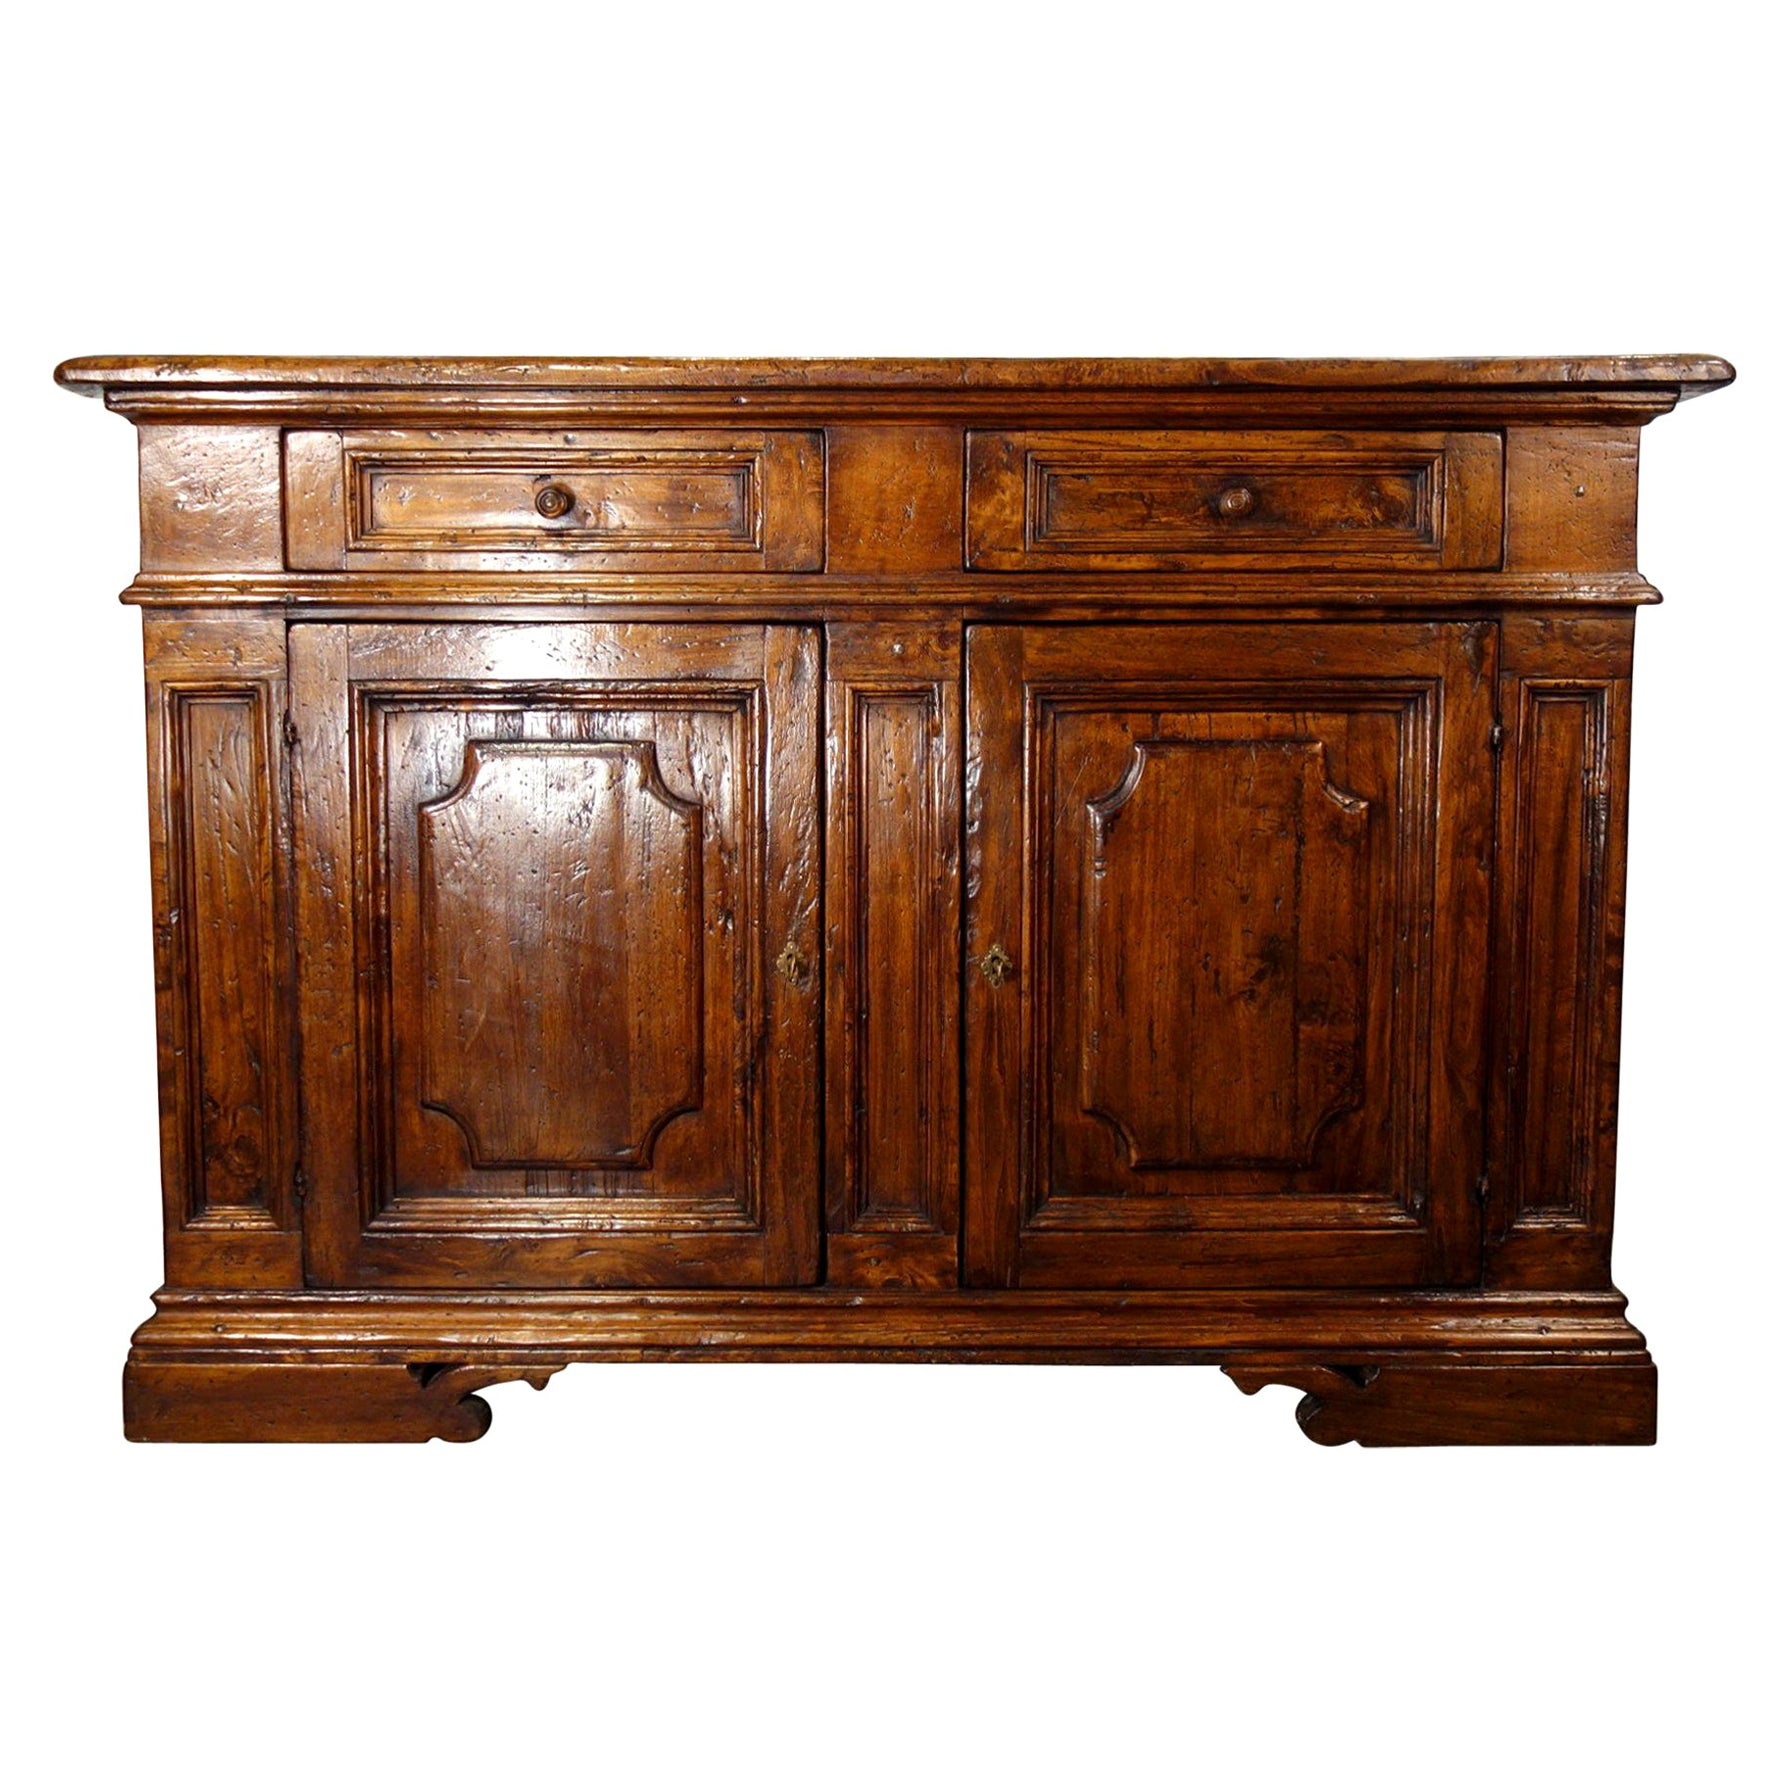 17th C Style FIRENZE Rustic Italian Credenza Size & Finish Options to order